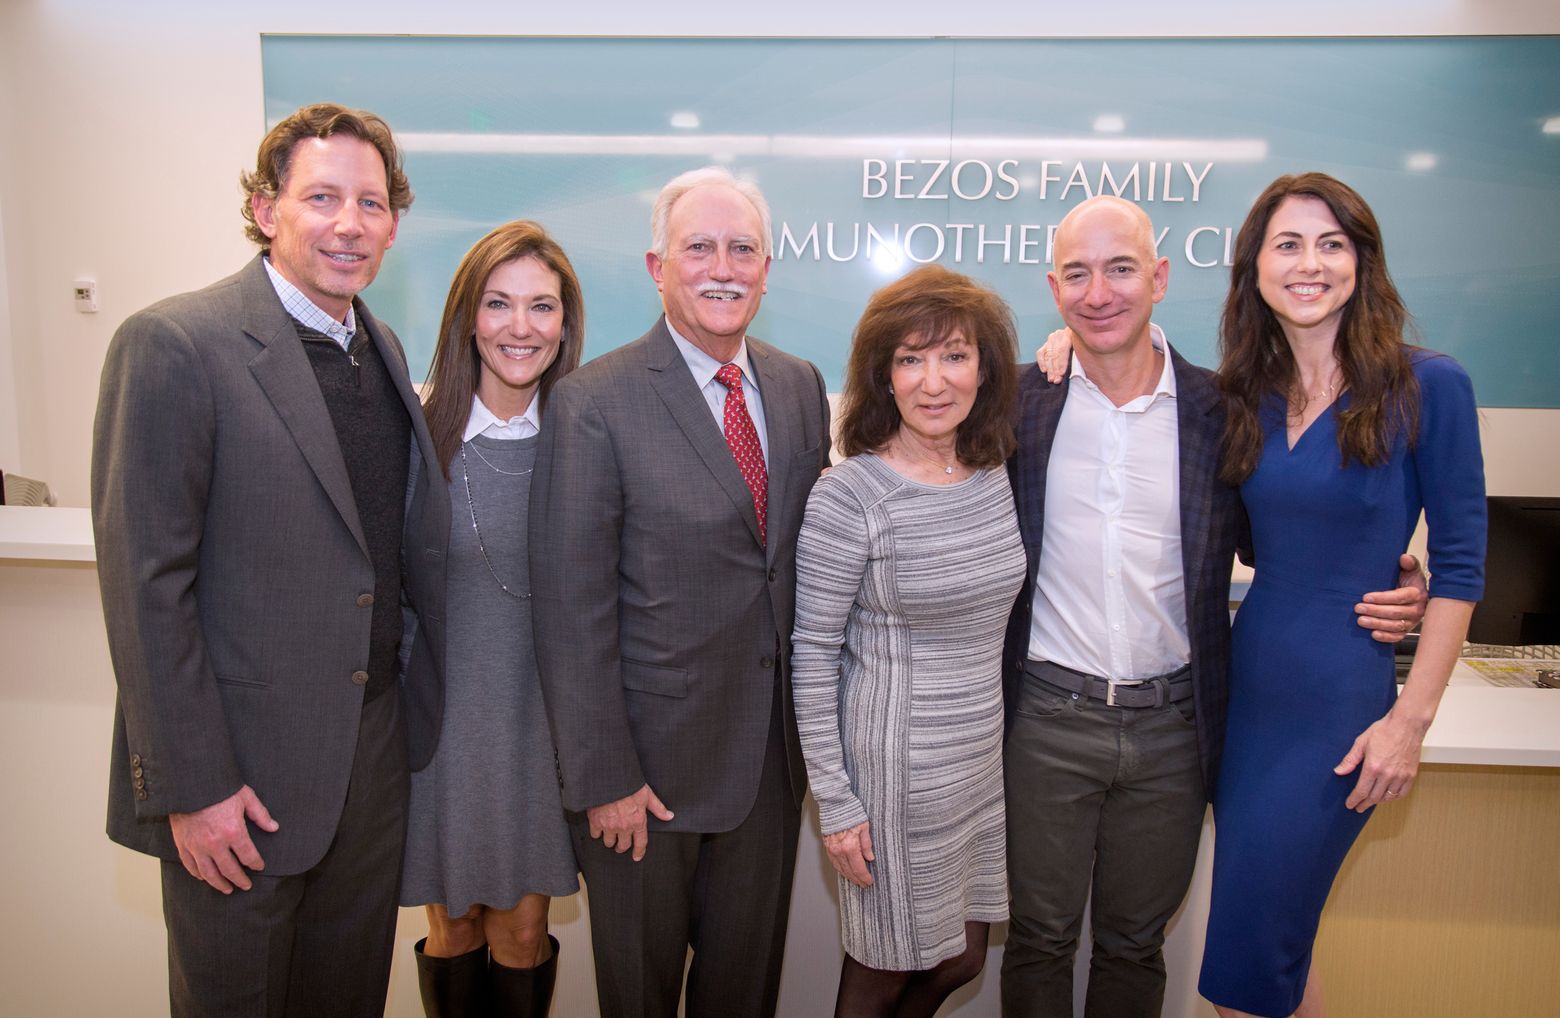 Fred Hutch receives $35 million donation, largest ever, from Bezos family